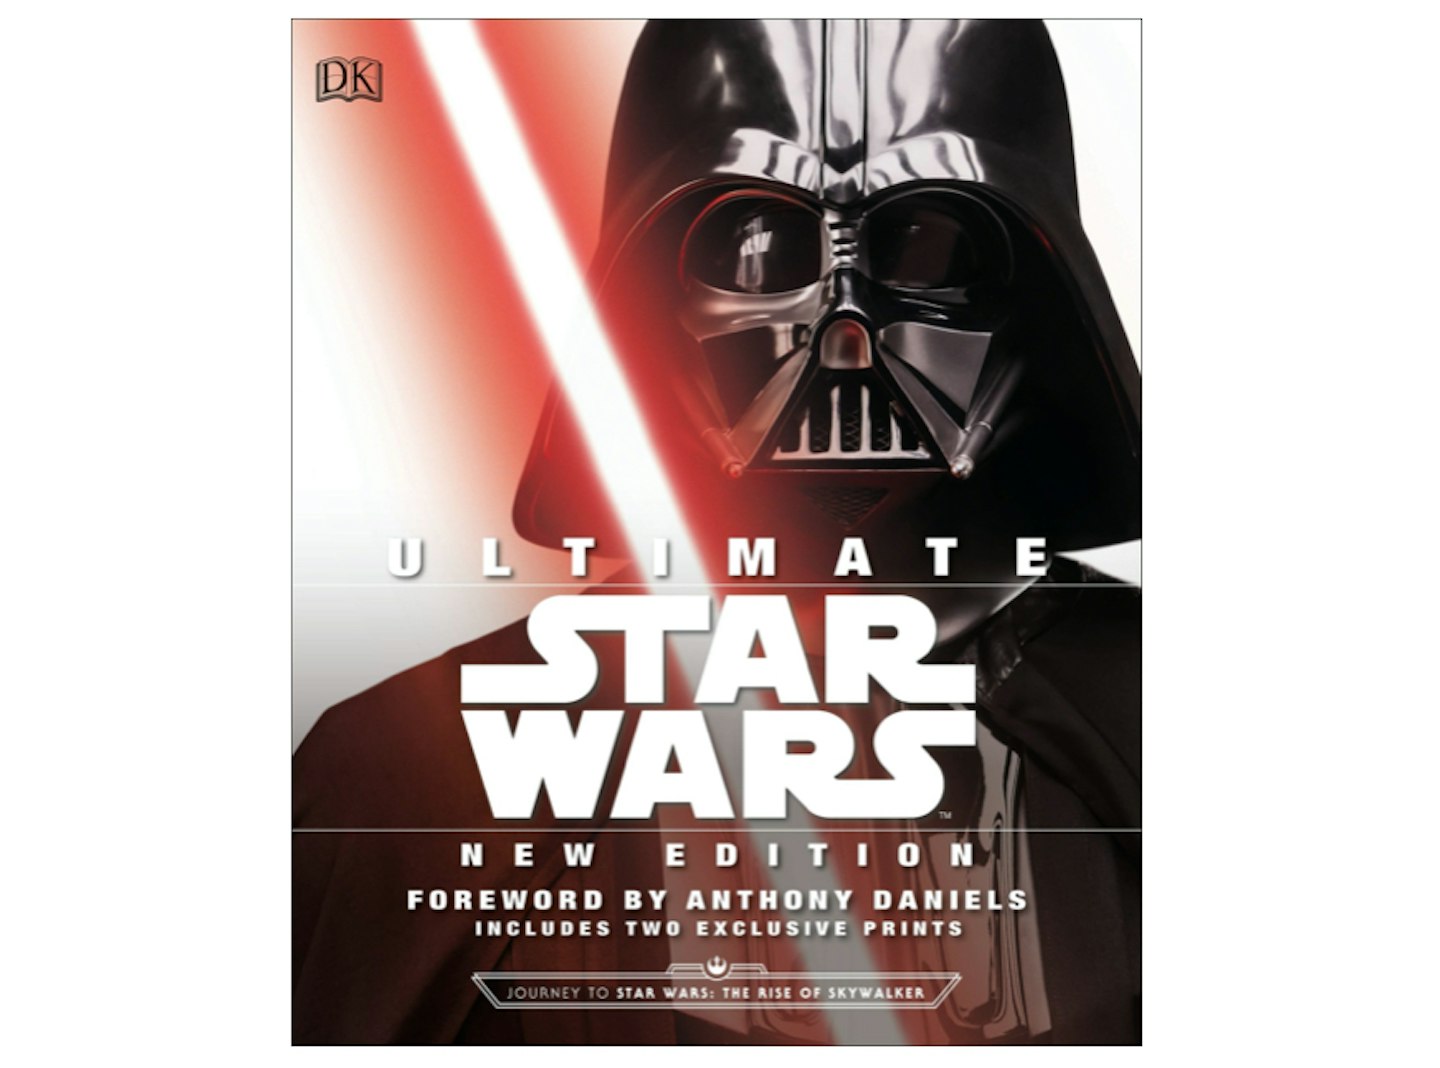 Ultimate Star Wars New Edition: The Definitive Guide To The Star Wars Universe